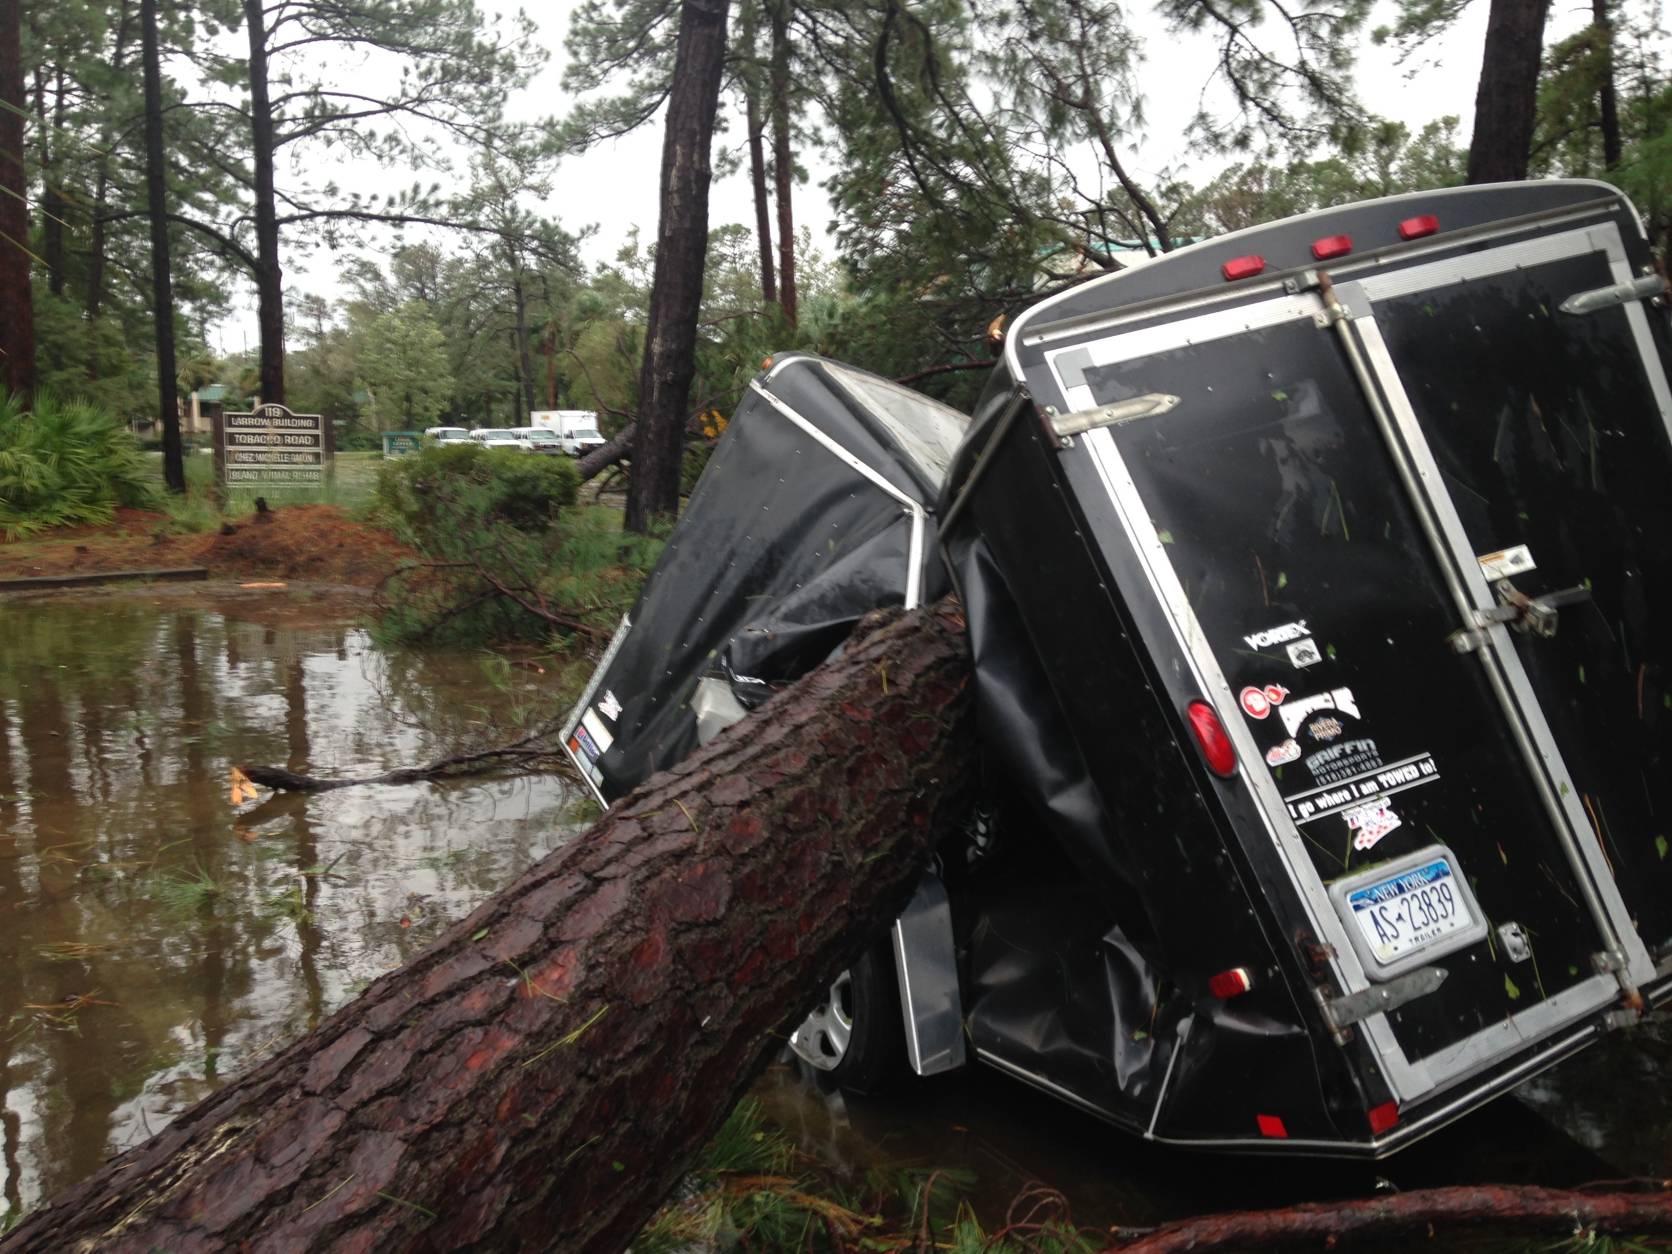 A trailer is destroyed from a fallen tree  in the aftermath of Hurricane Matthew at Hilton Head, S.C., on Saturday, Oct. 8, 2016.  Matthew plowed north along the Atlantic coast, flooding towns and gouging out roads in its path.   (AP Photo/Jeffrey Collins)